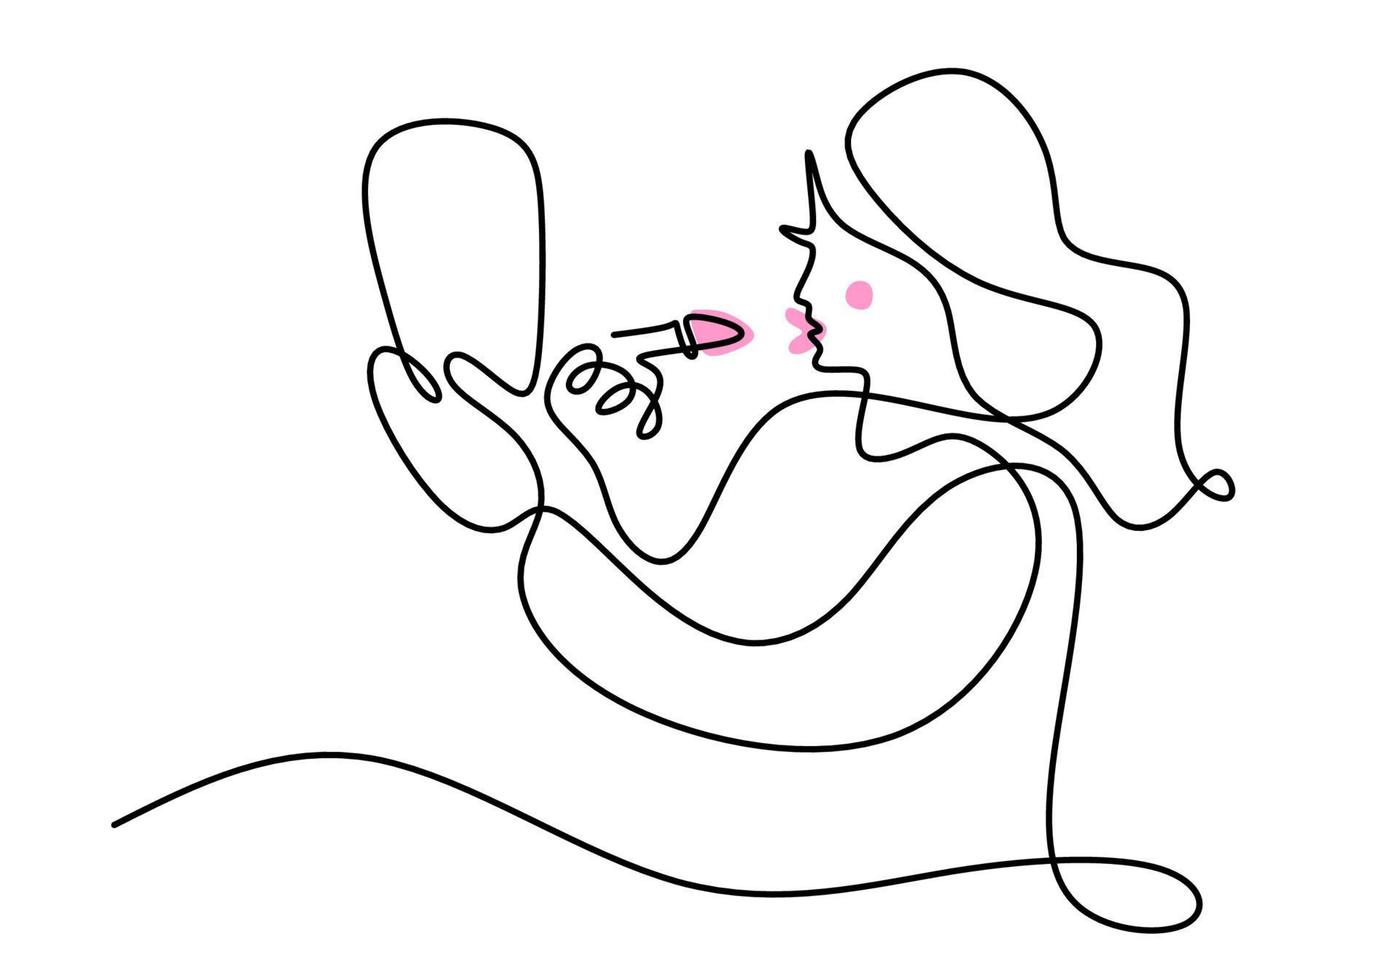 Continuous single line drawing of happy woman face using pink lipstick vector